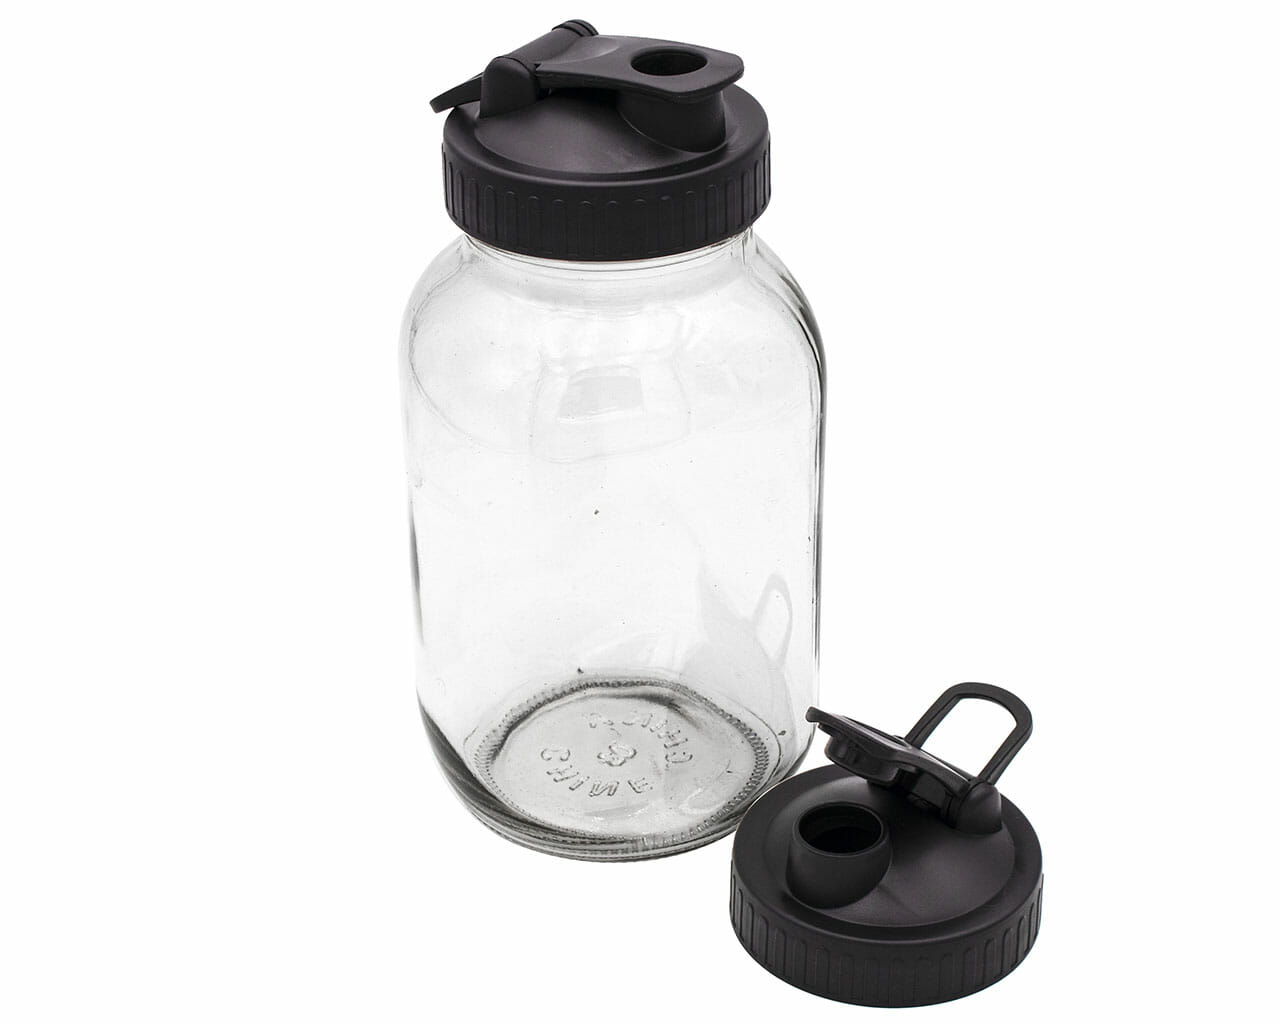 Pour & Store Lid with Carry Loop for Mason Jars